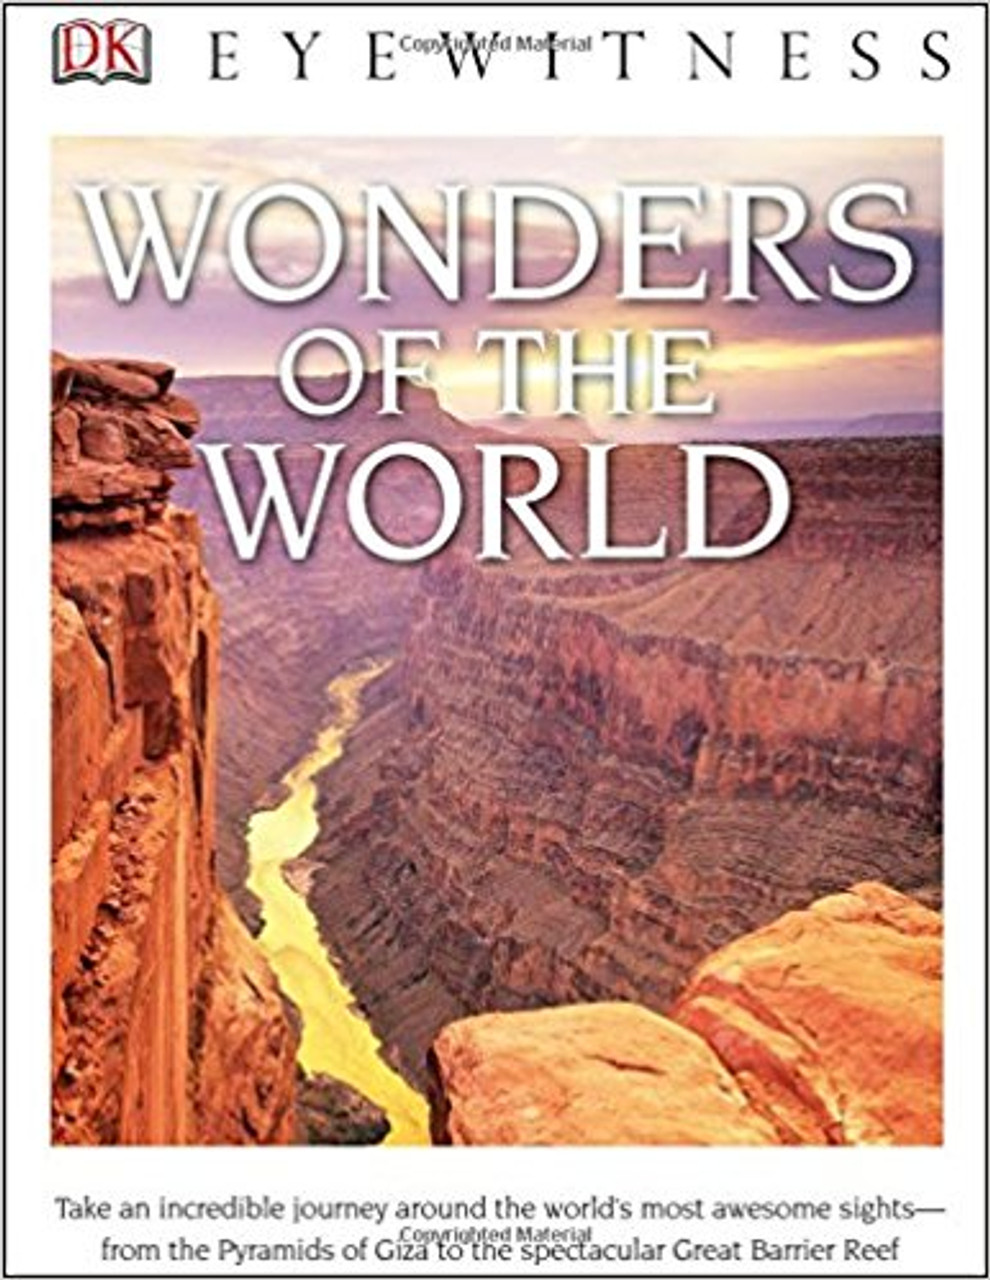 Wonders of the World by DK